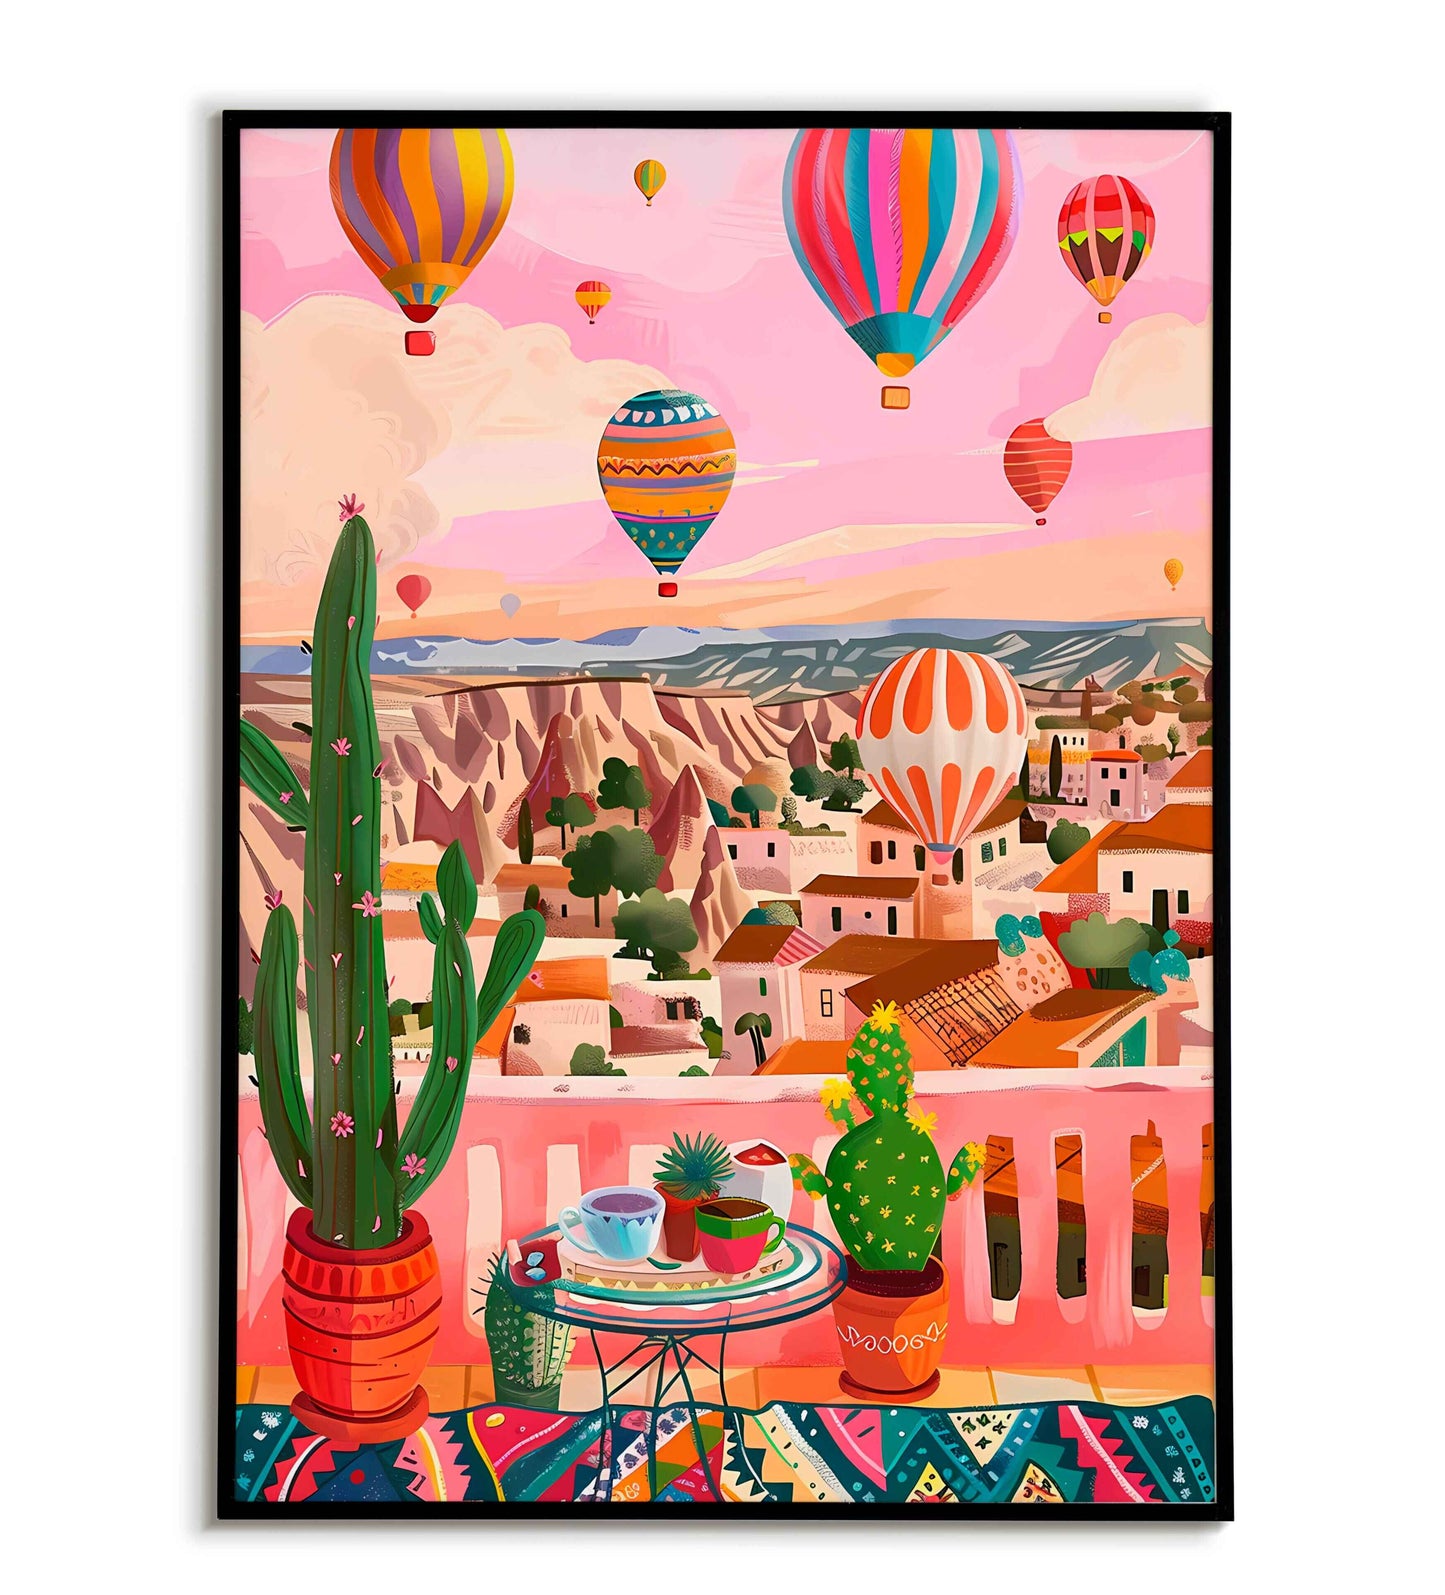 Cappadocia Illustration printable poster. Available for purchase as a physical poster or digital download.